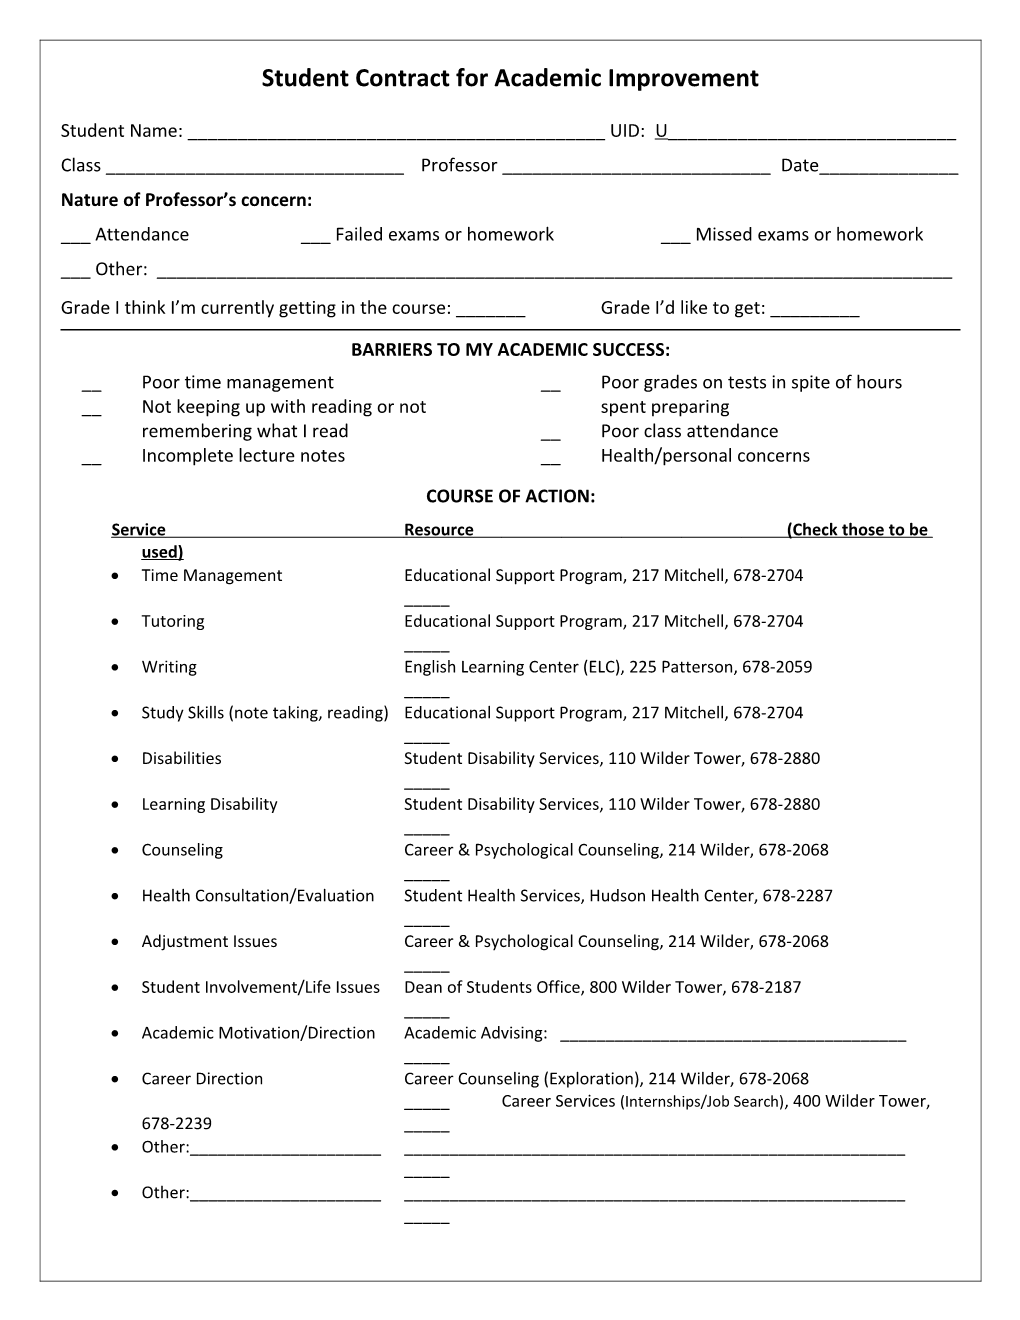 Student Contract for Academic Improvement